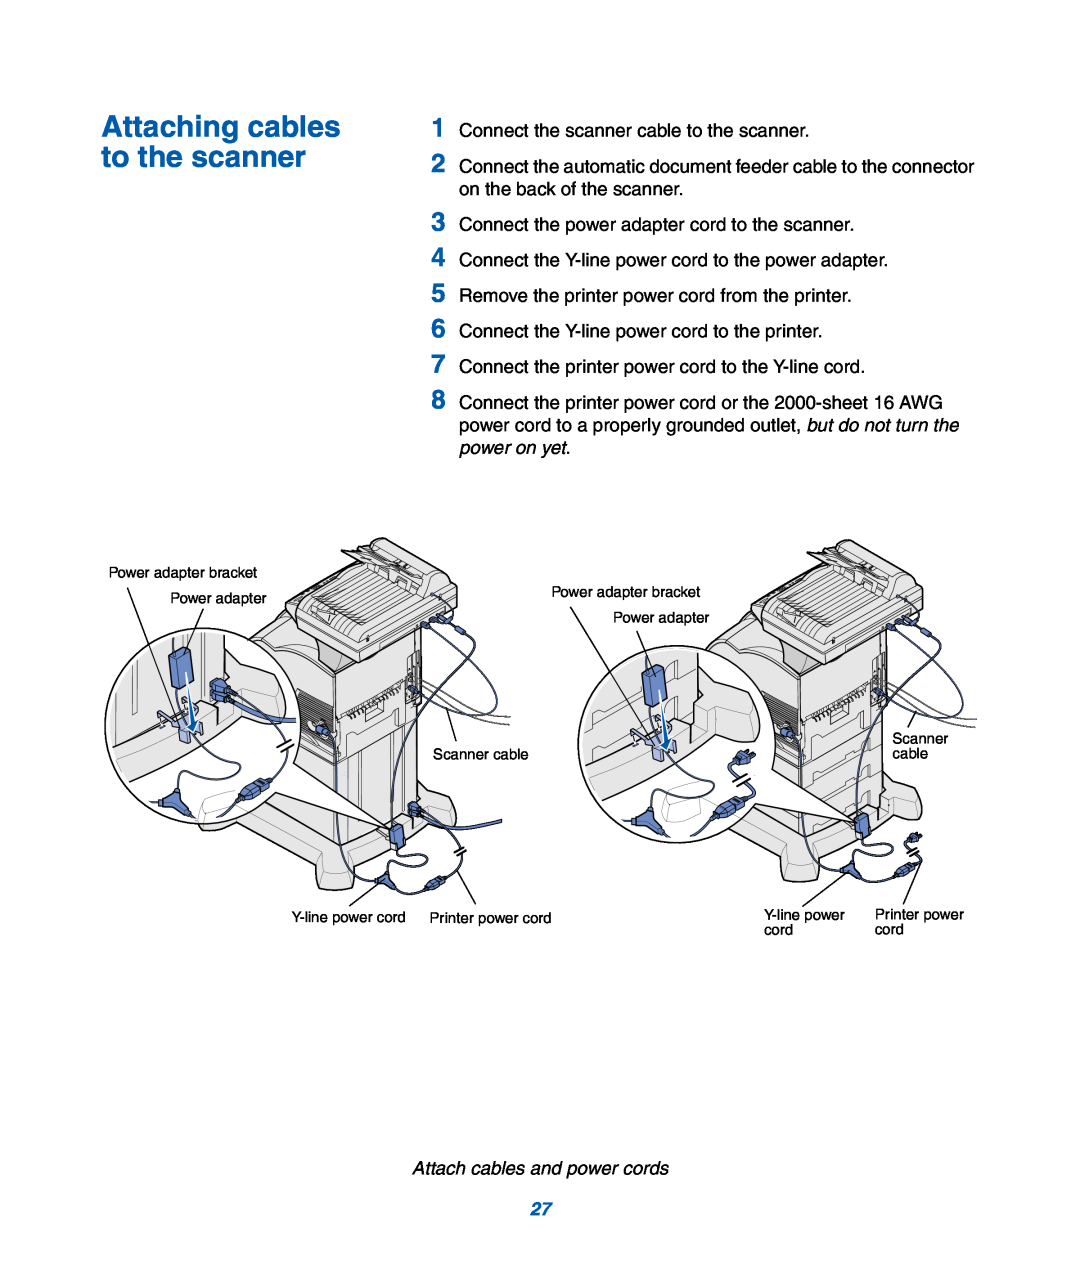 IBM M22 MFP manual Attaching cables to the scanner, Attach cables and power cords 